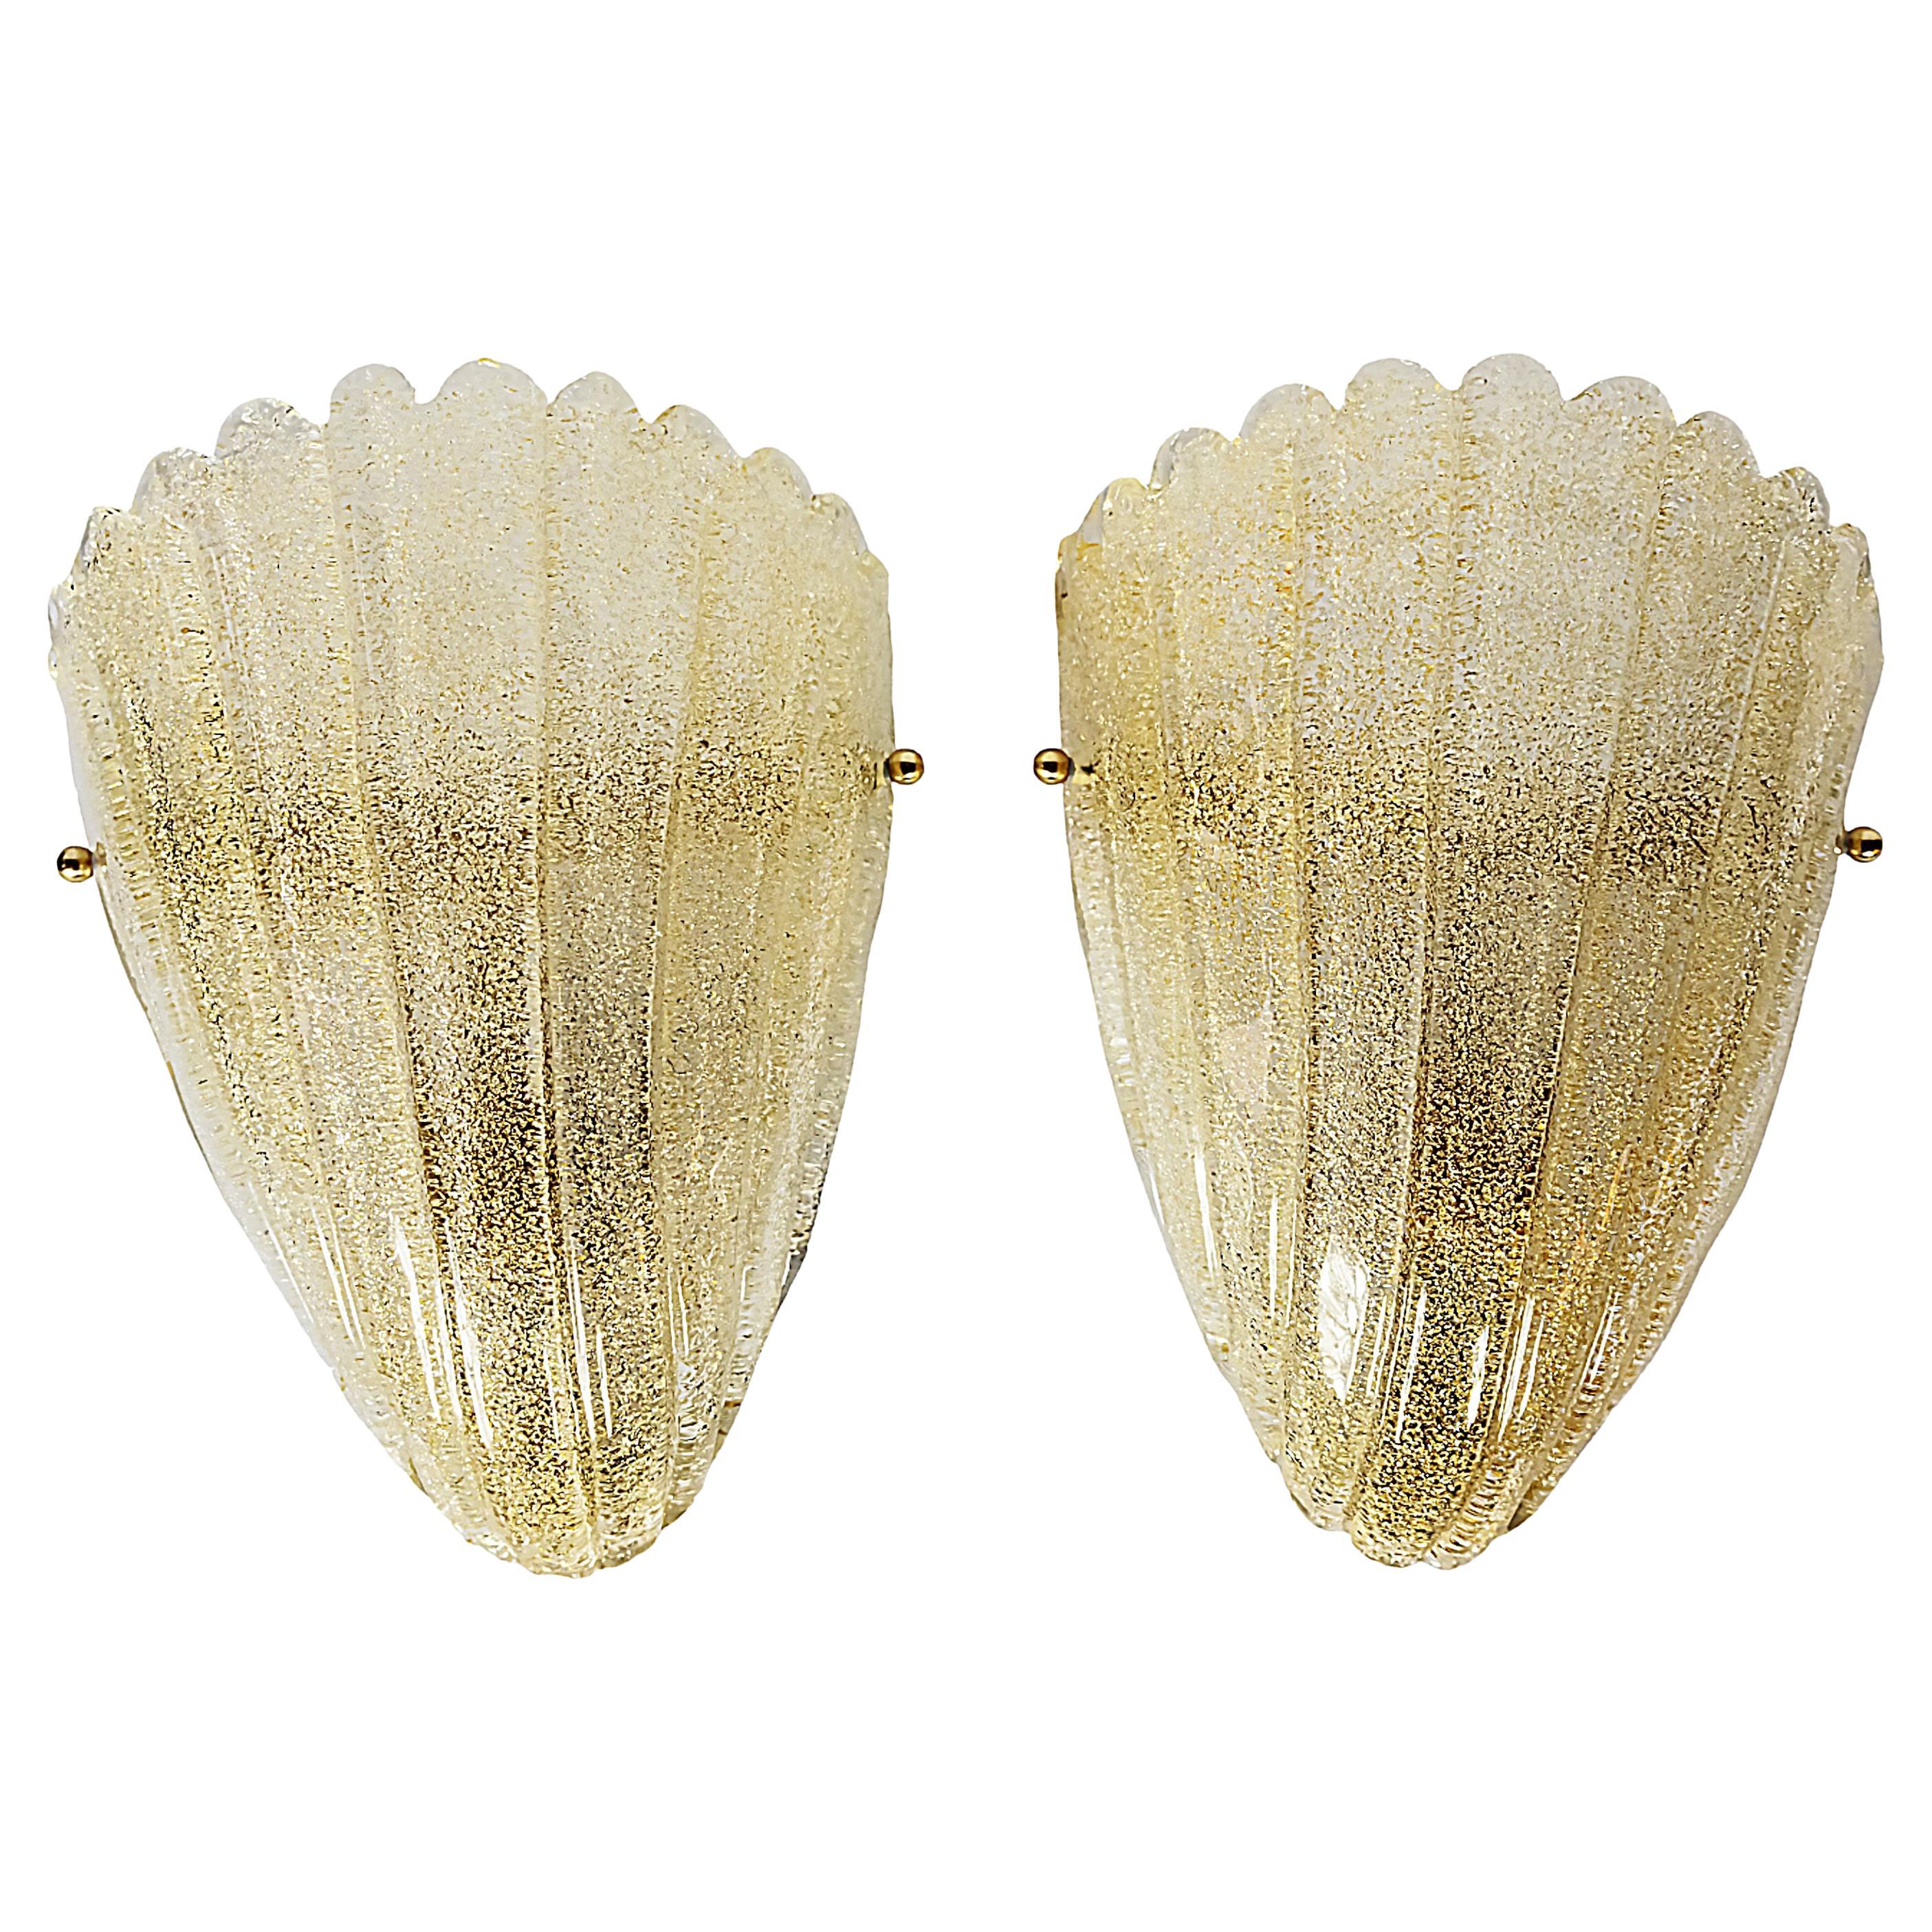 Pair of Italian Murano Glass Wall Light Sconces For Sale